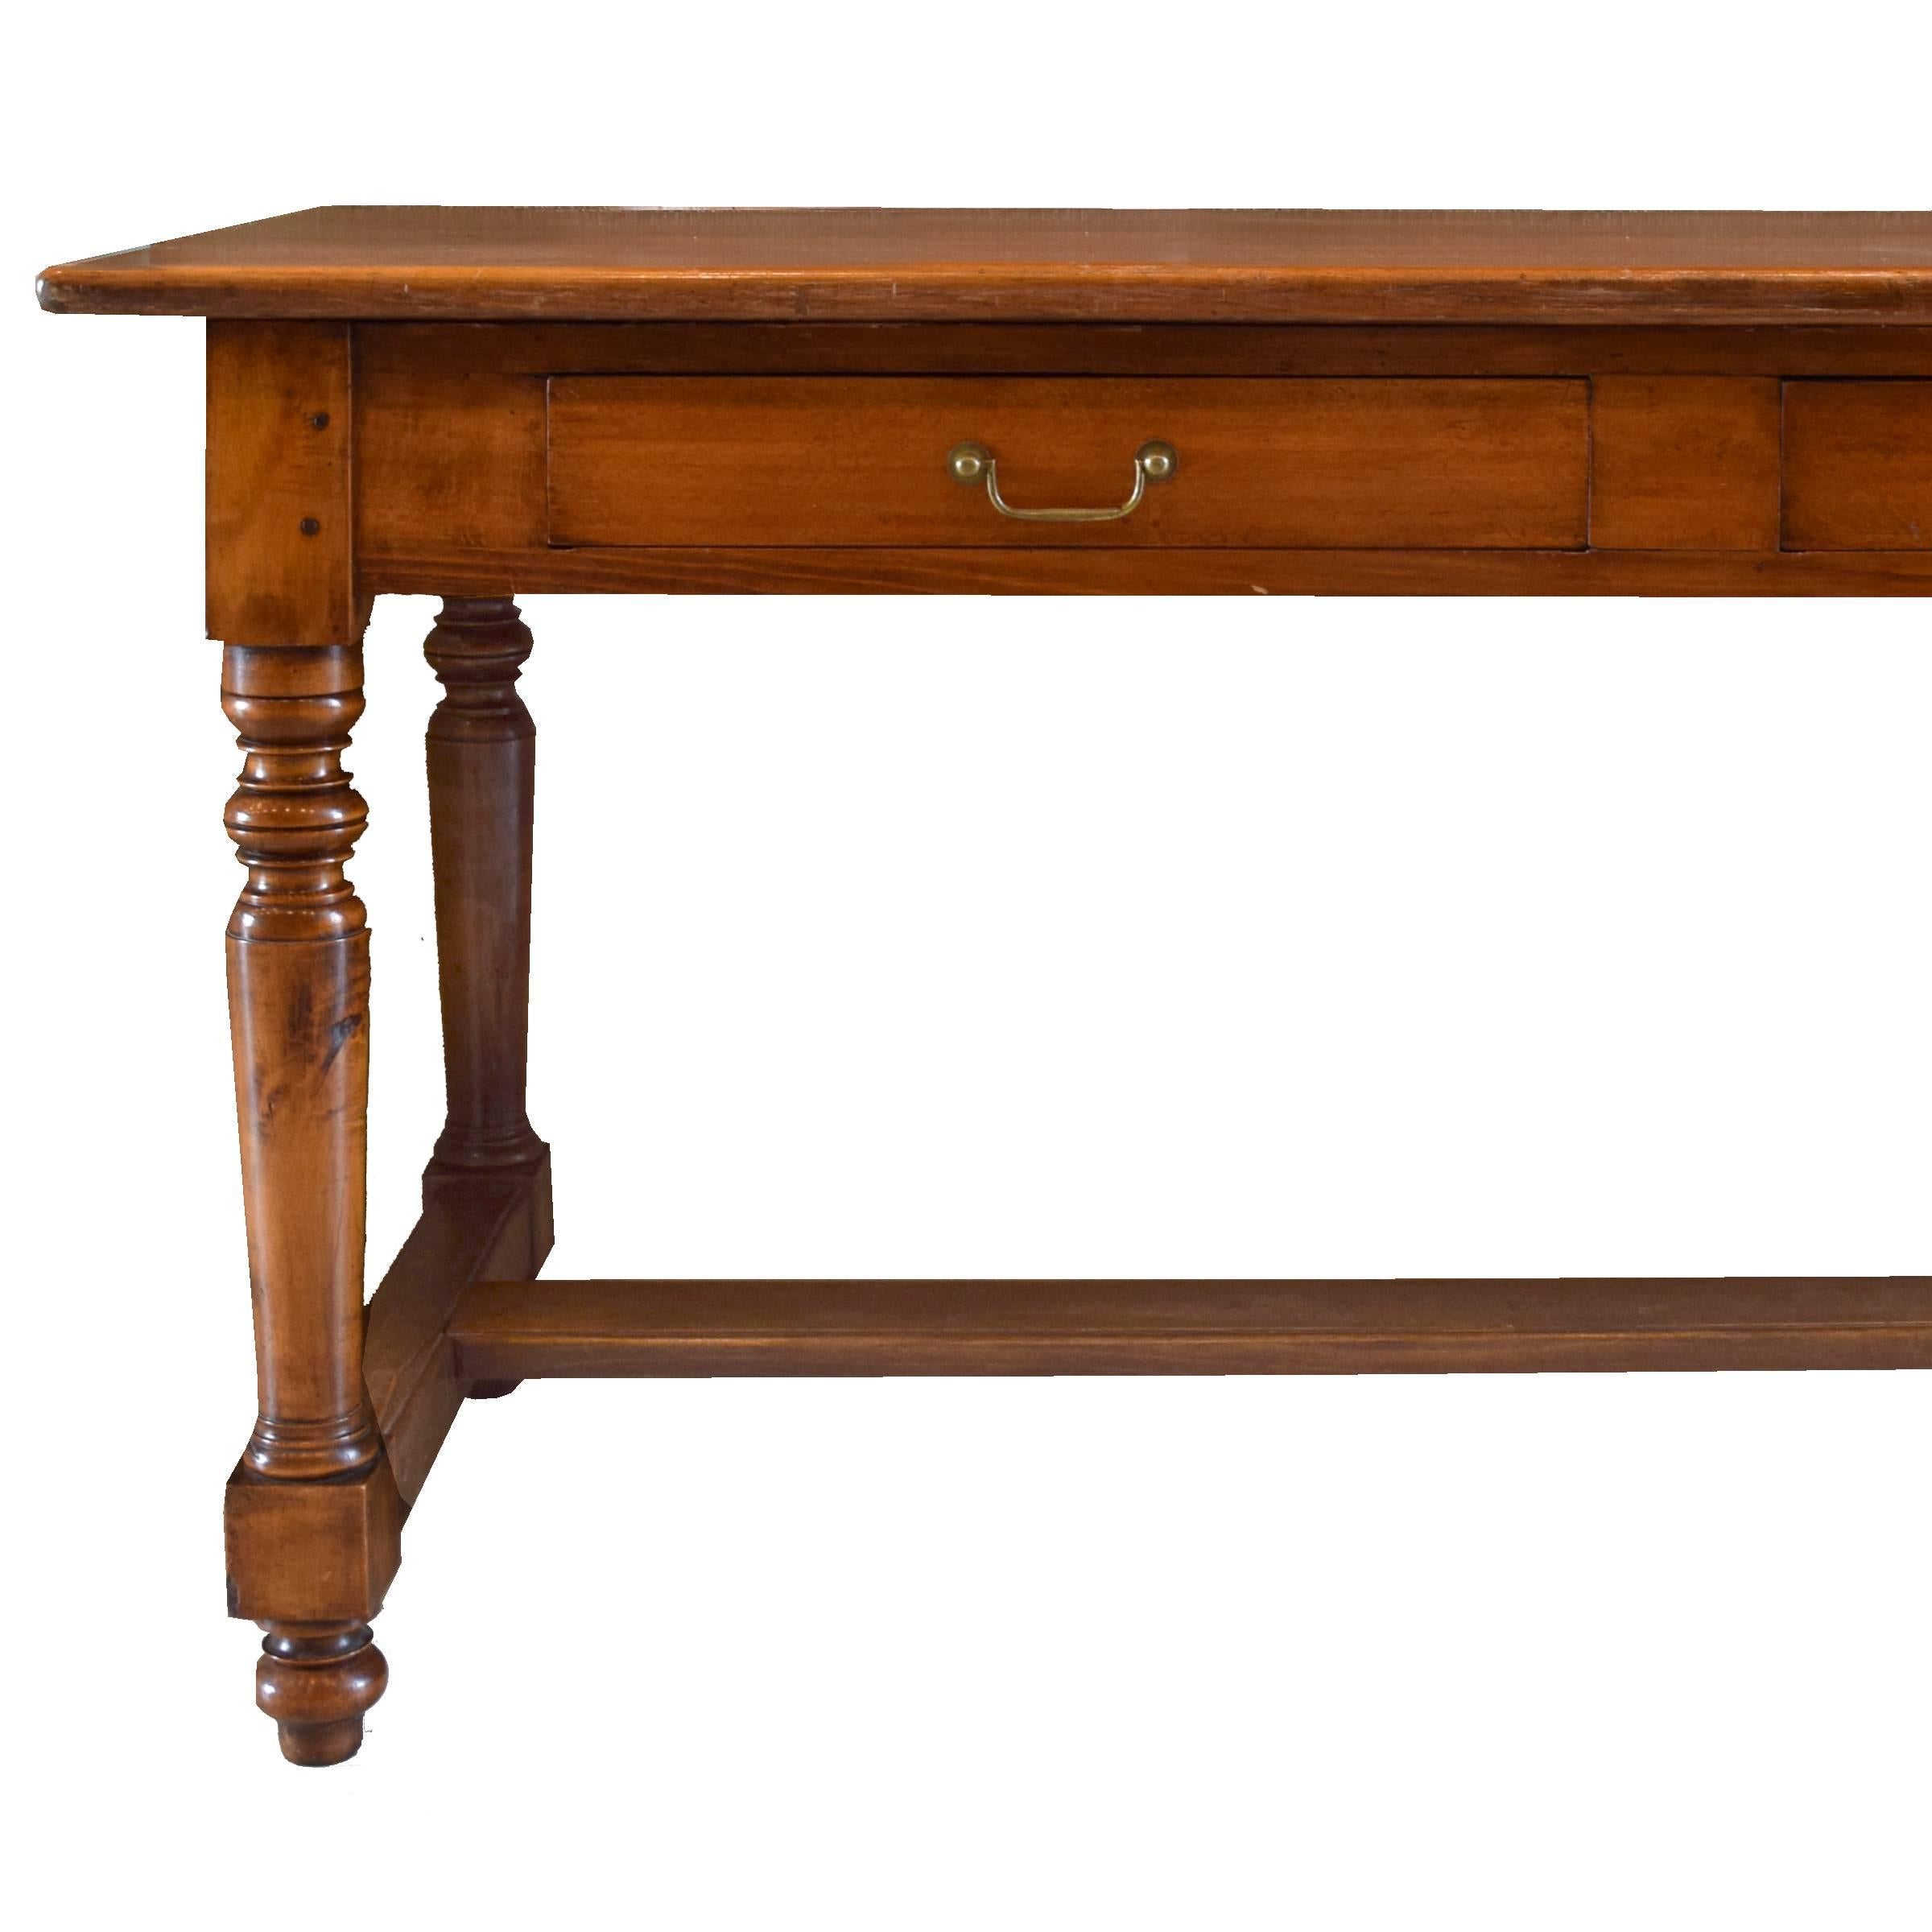 A fantastic walnut French draper's table with four drawers and six turned legs with stretchers.